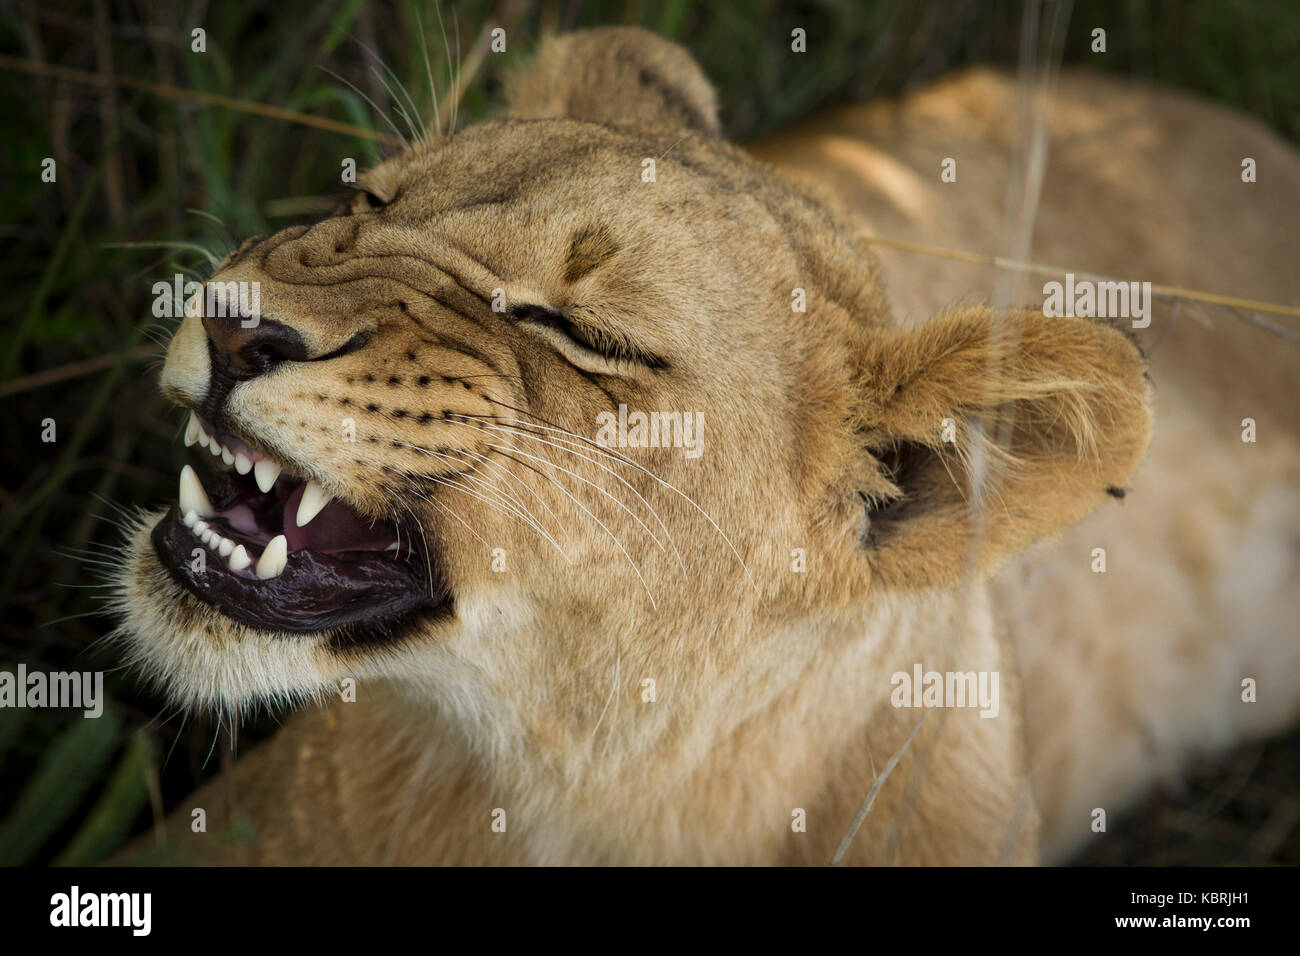 young lion showing teeth, yawning in close up Stock Photo